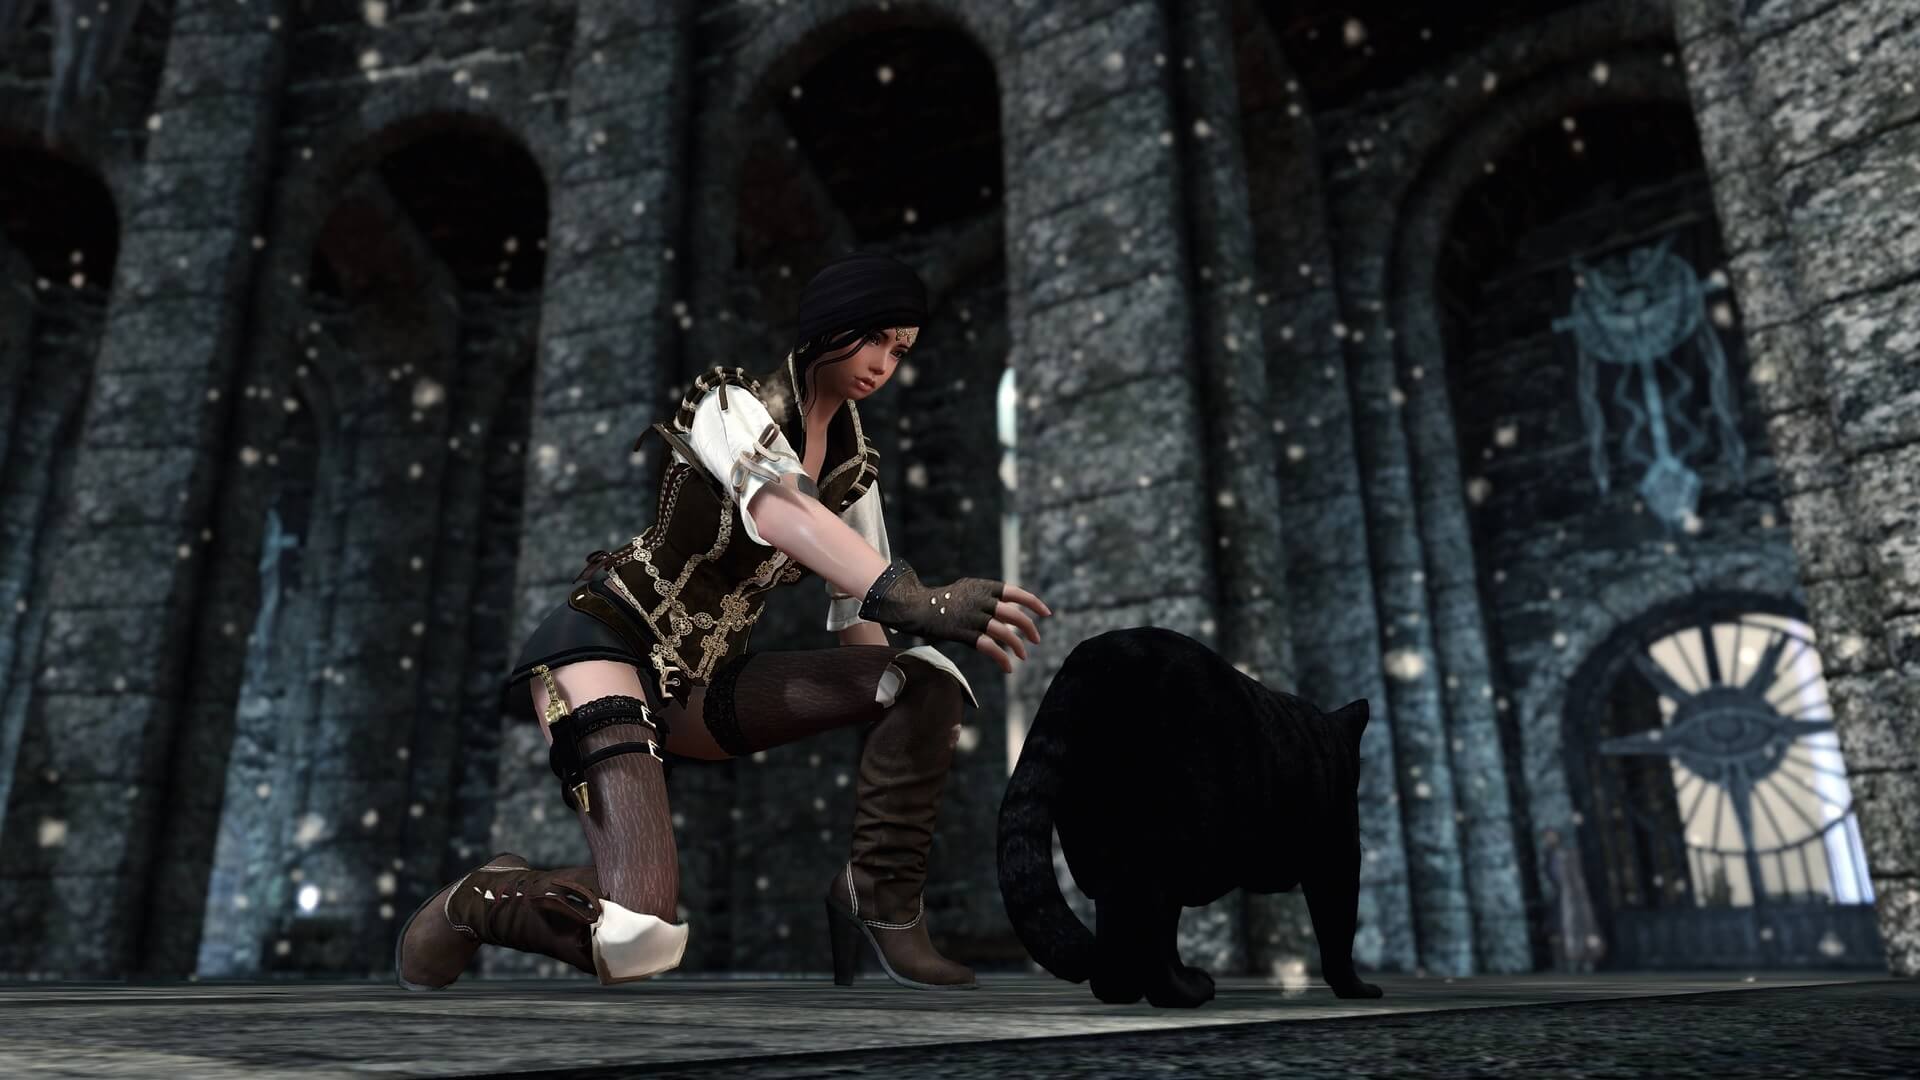 Another cat being pet in Skyrim.